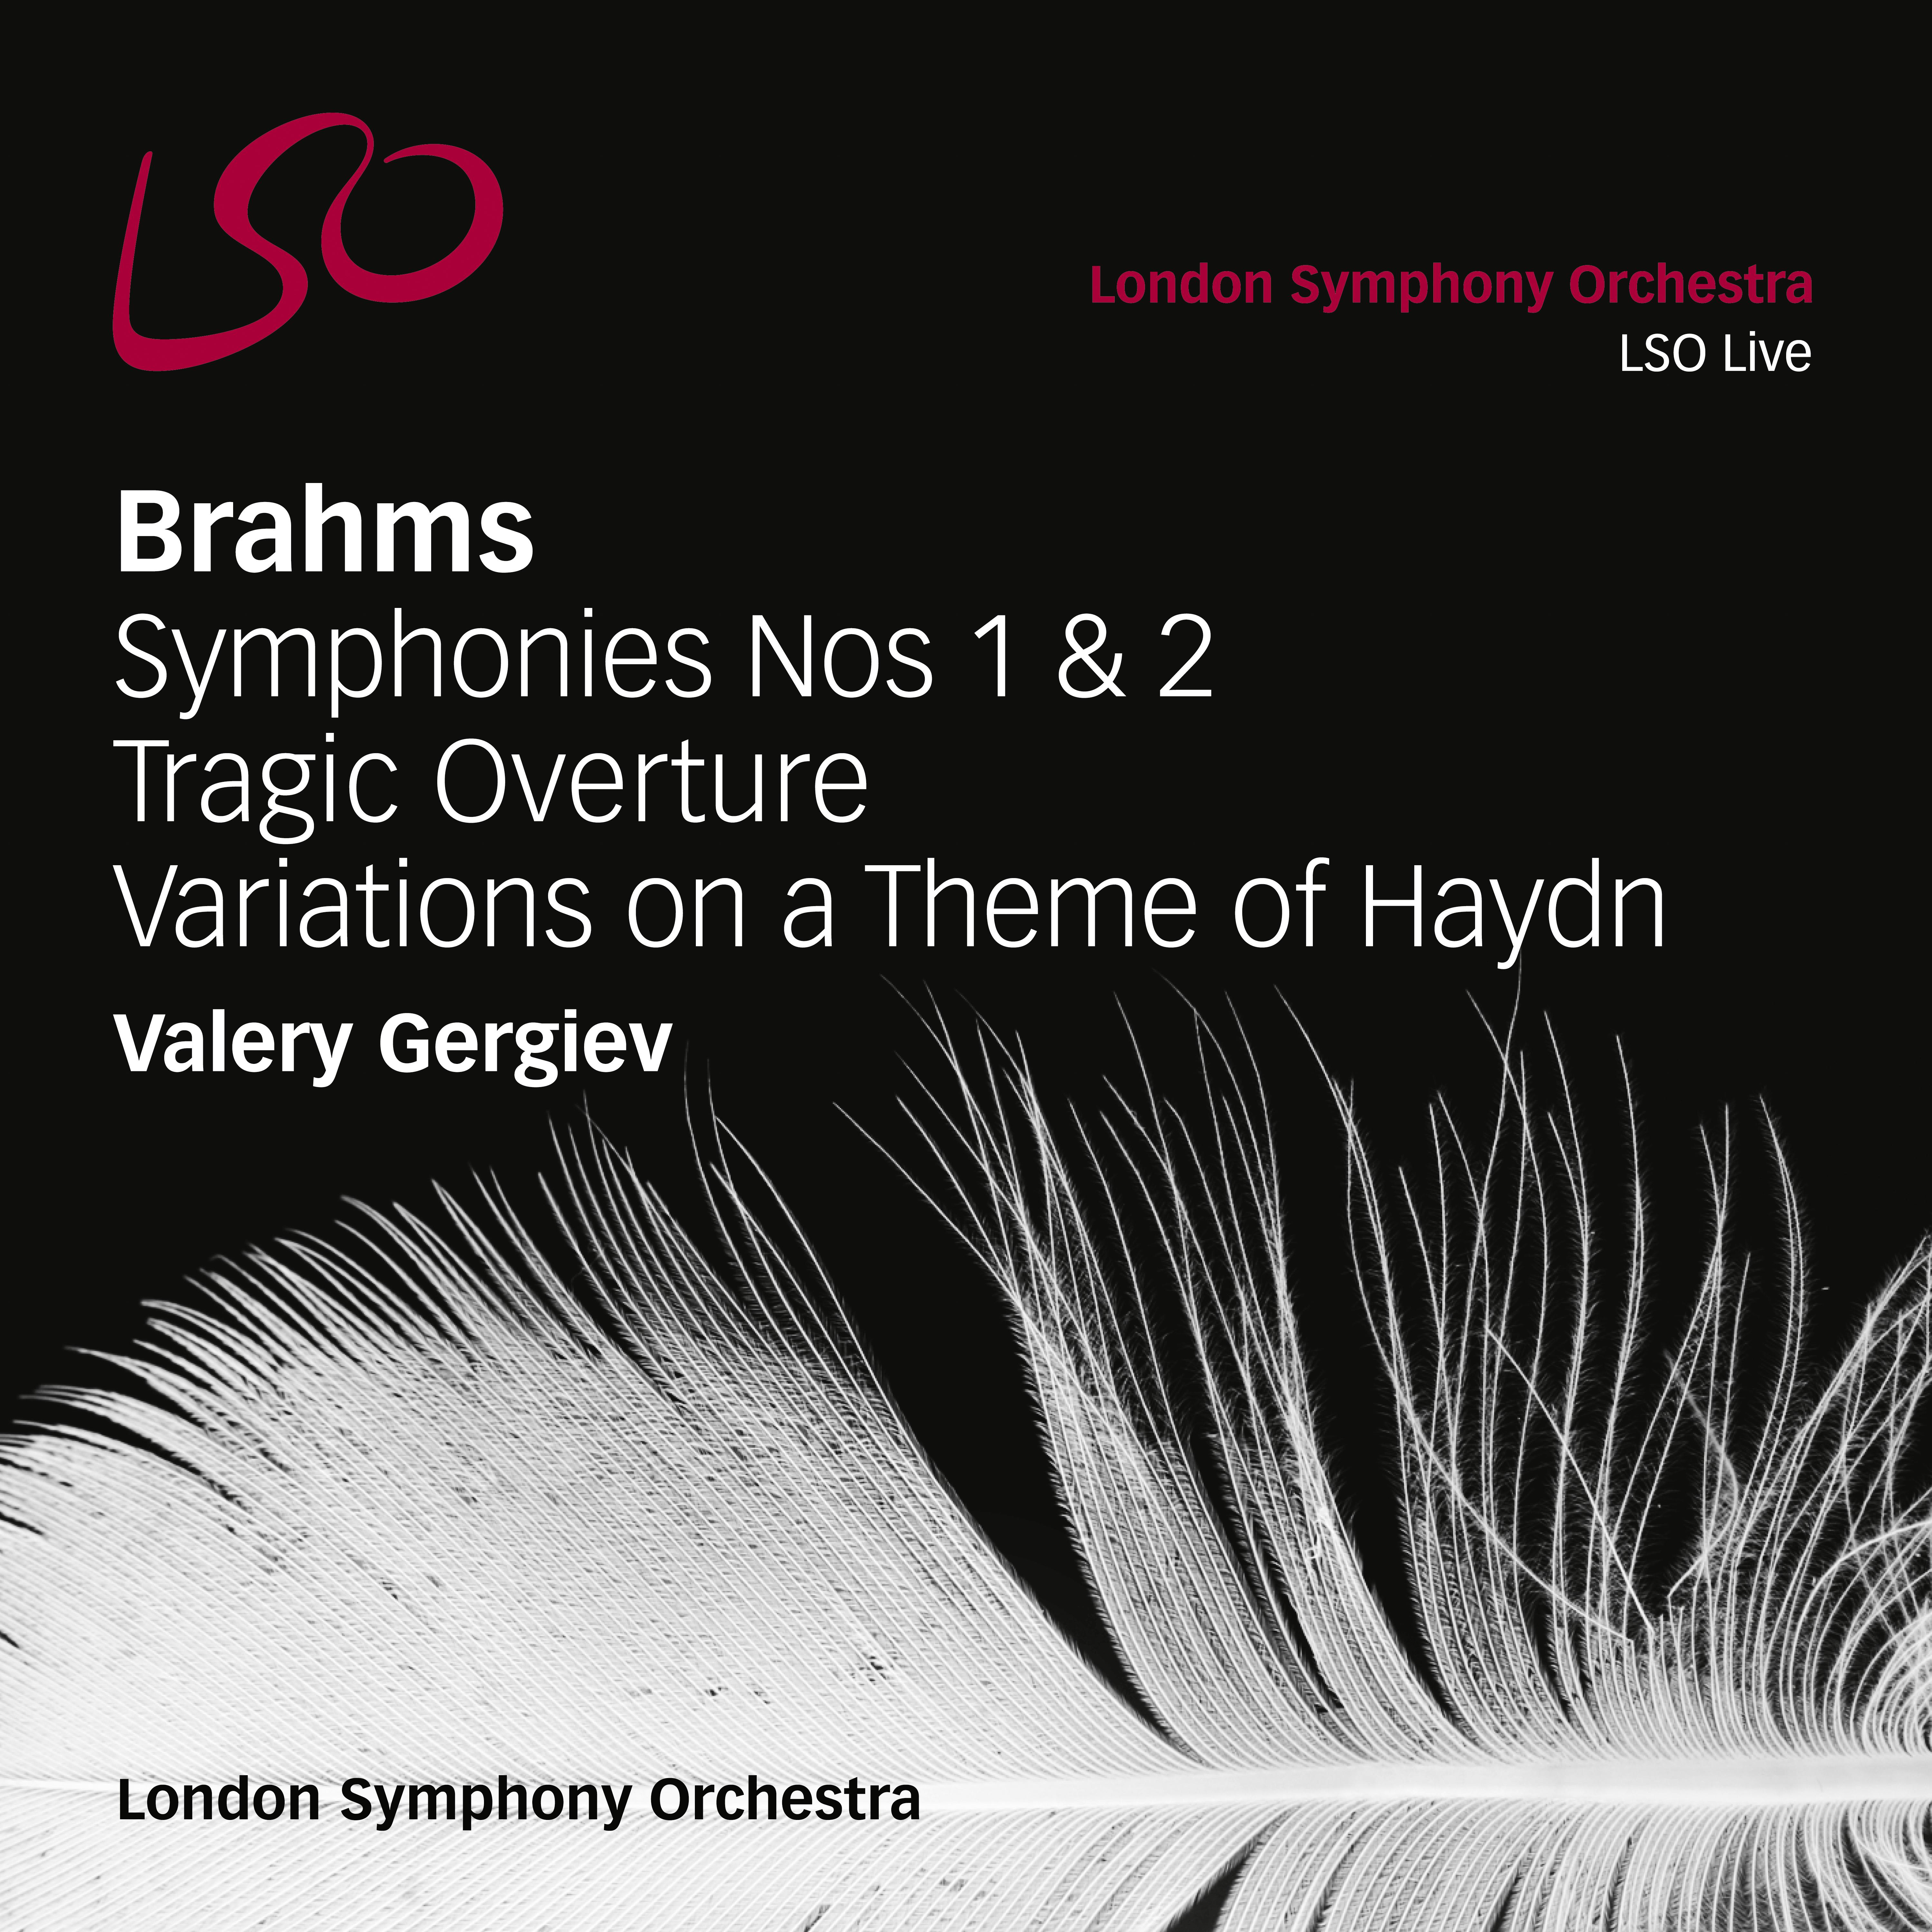 Variations on a Theme of Haydn, Op. 56a: III. Variation II, Più vivace